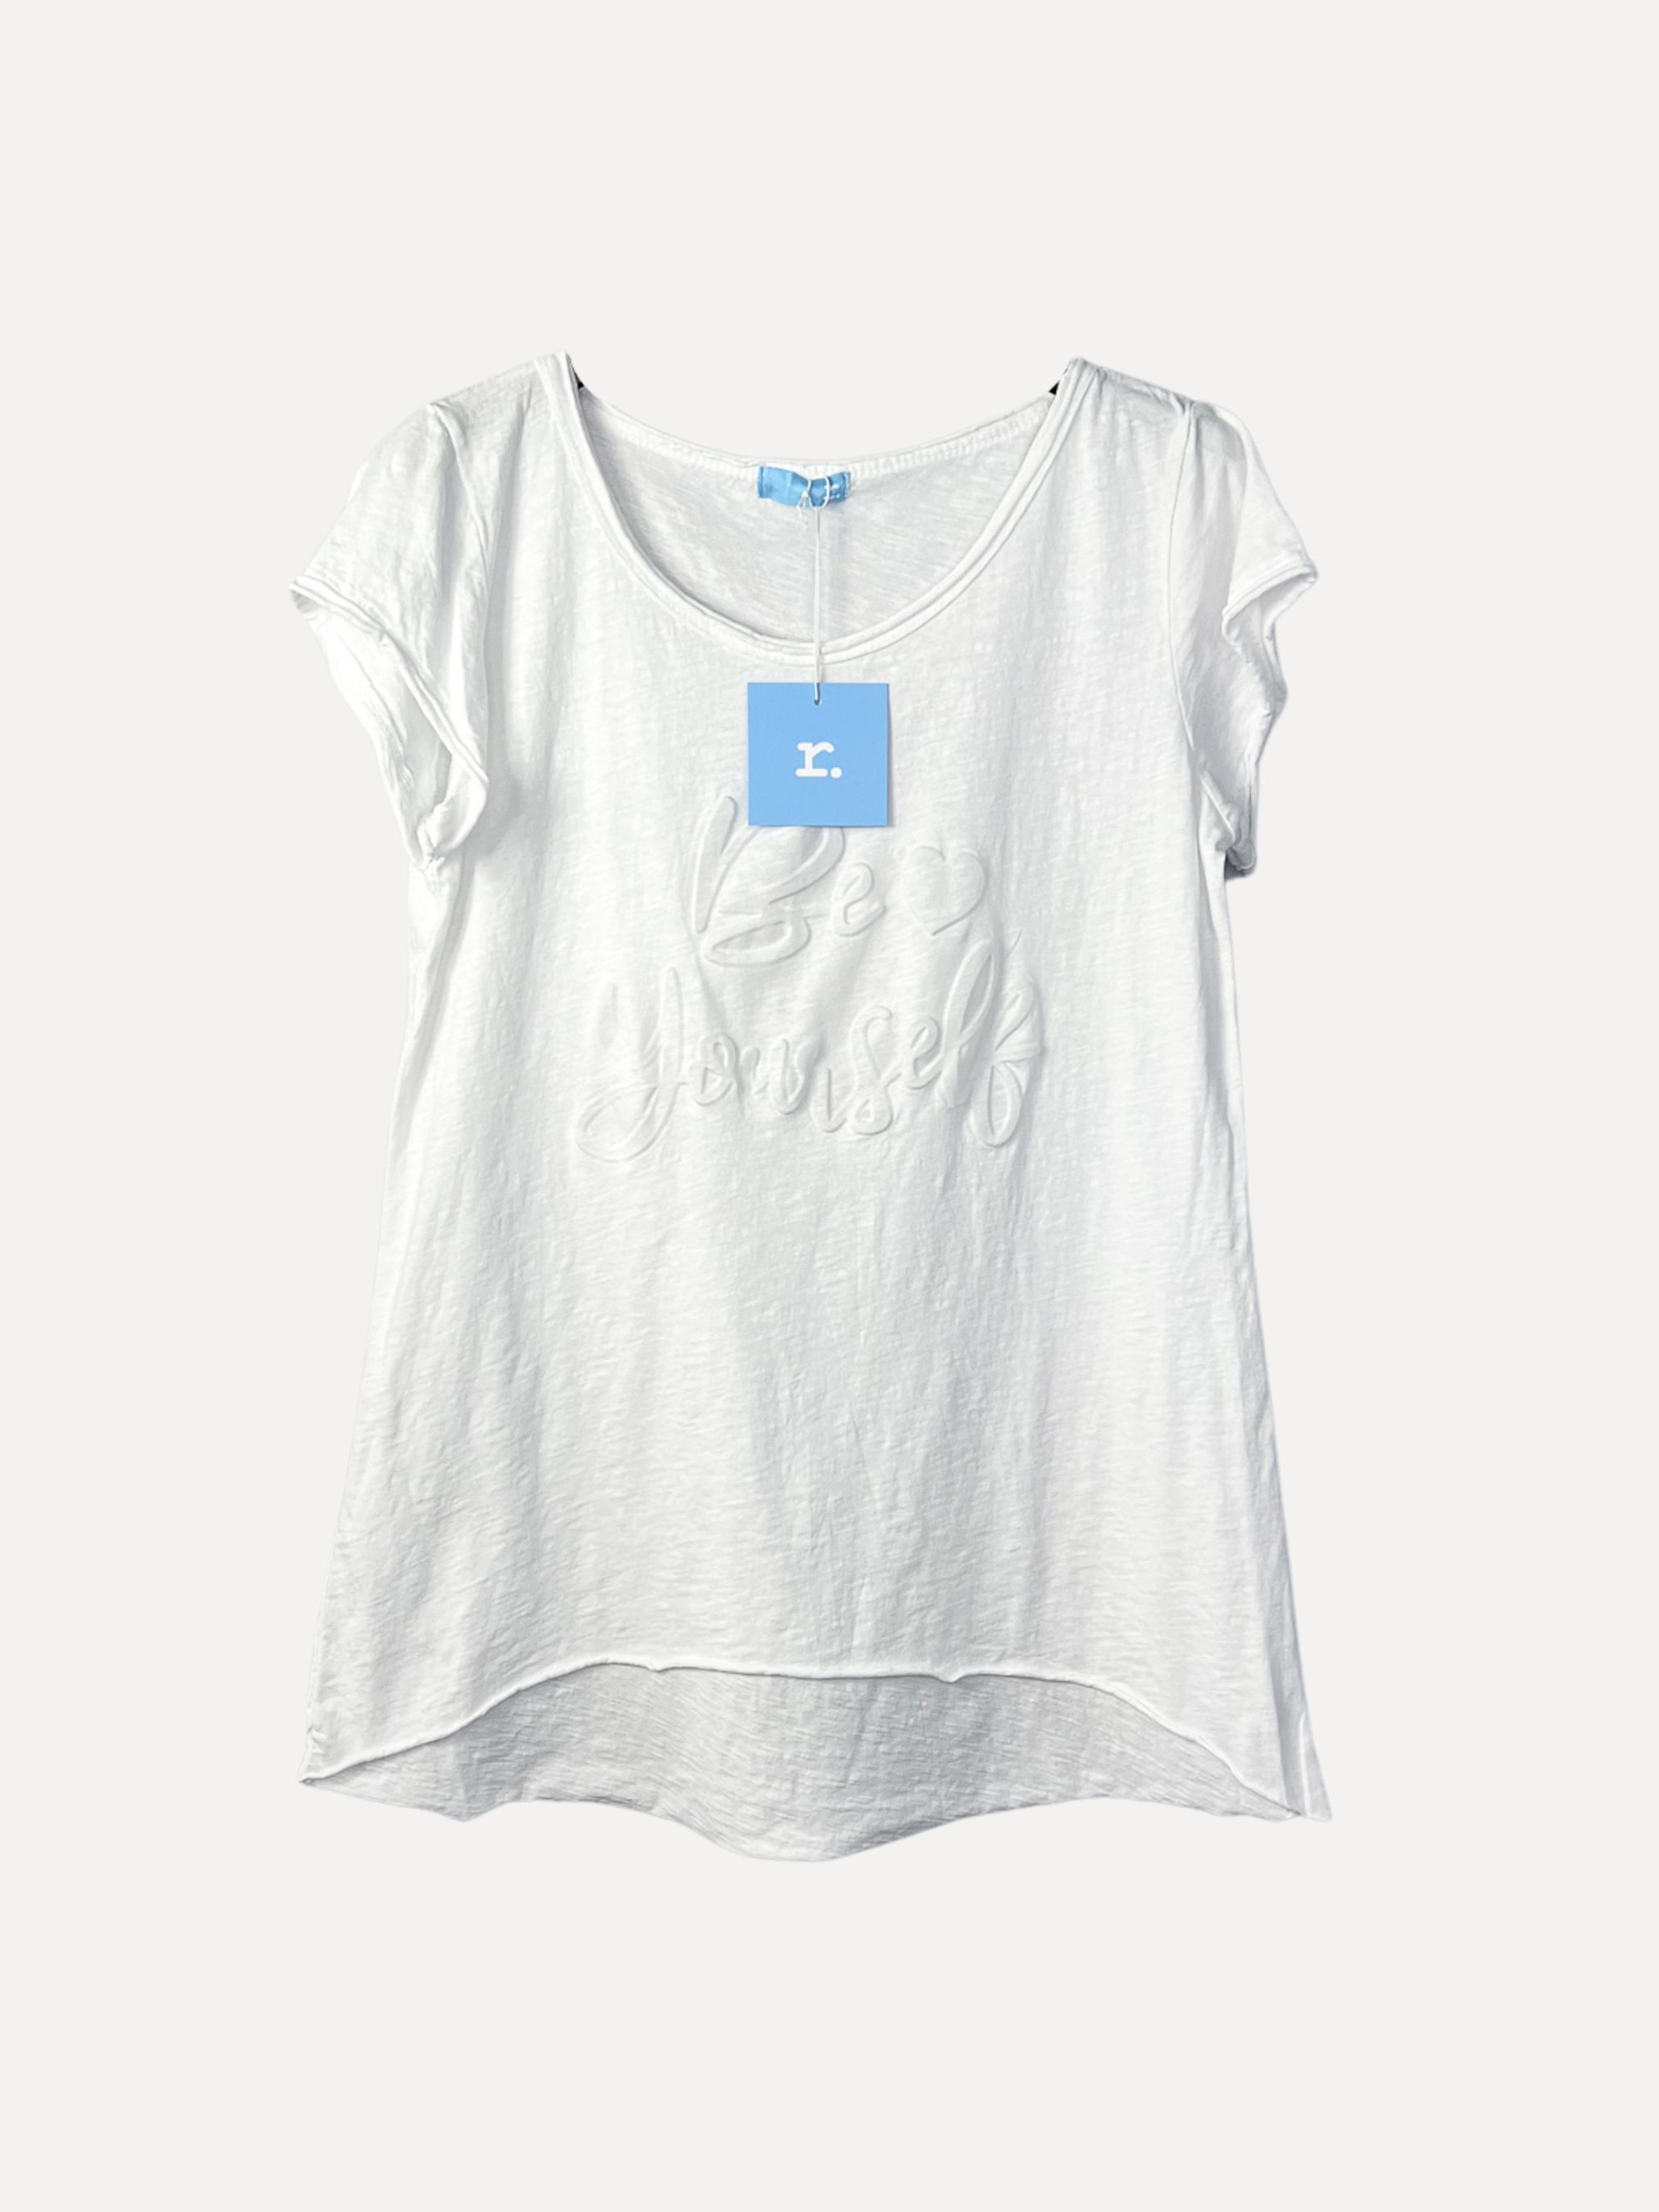 BE YOURSELF T-Shirt, White